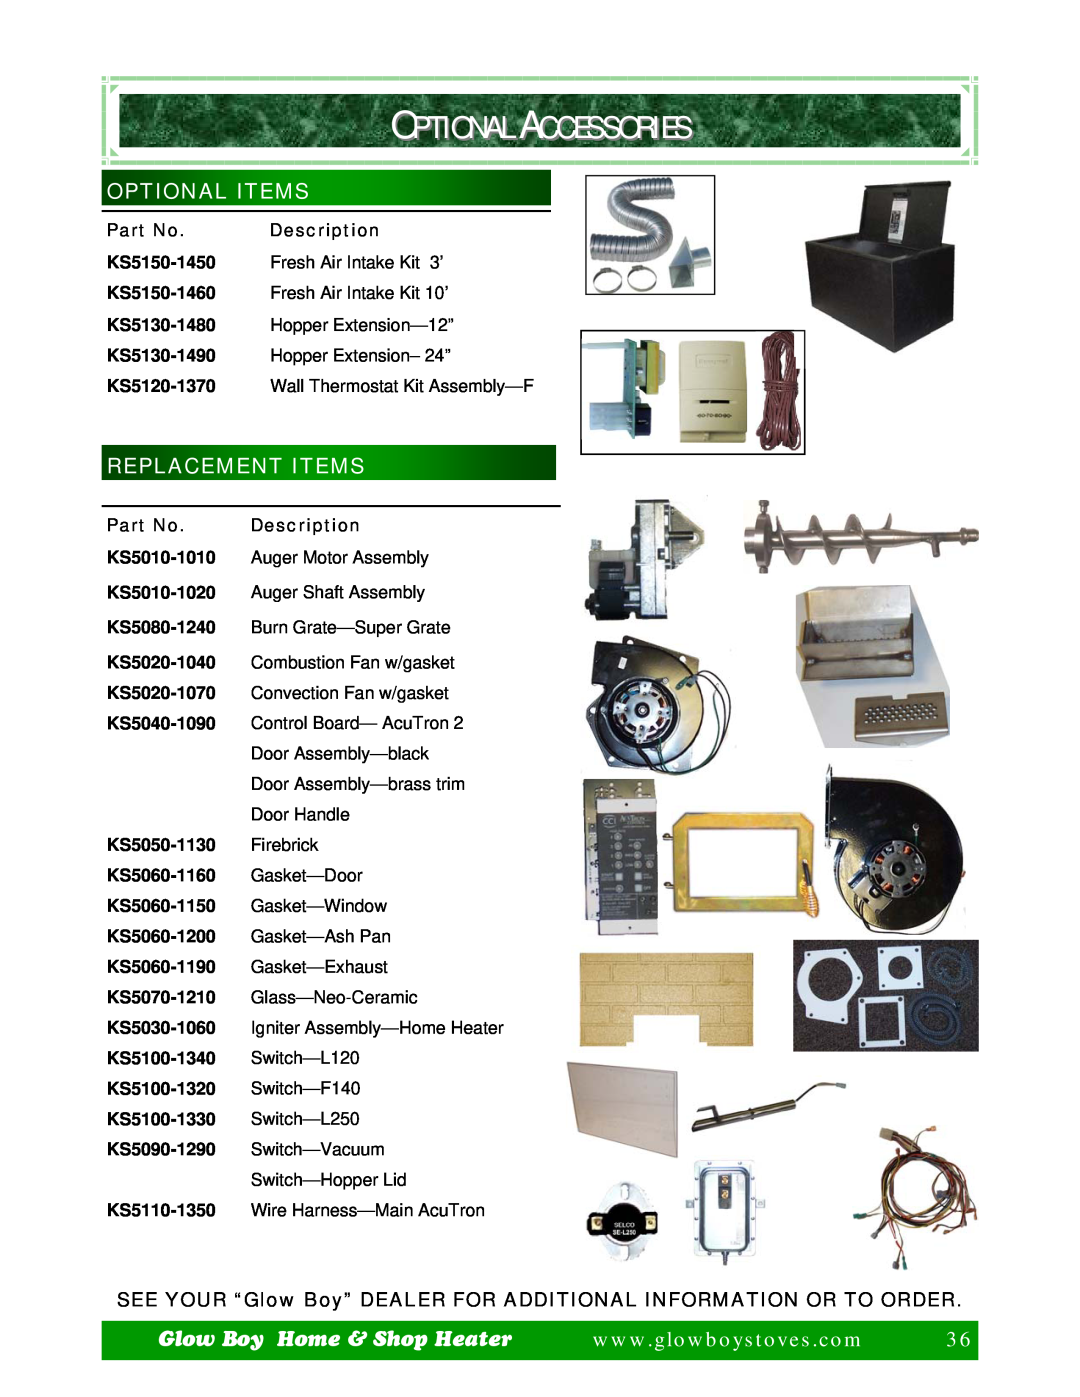 Dansons Group CCGB 2, CCGB 1 manual Optional Accessories, Optional Items, Replacement Items, Glow Boy Home & Shop Heater 